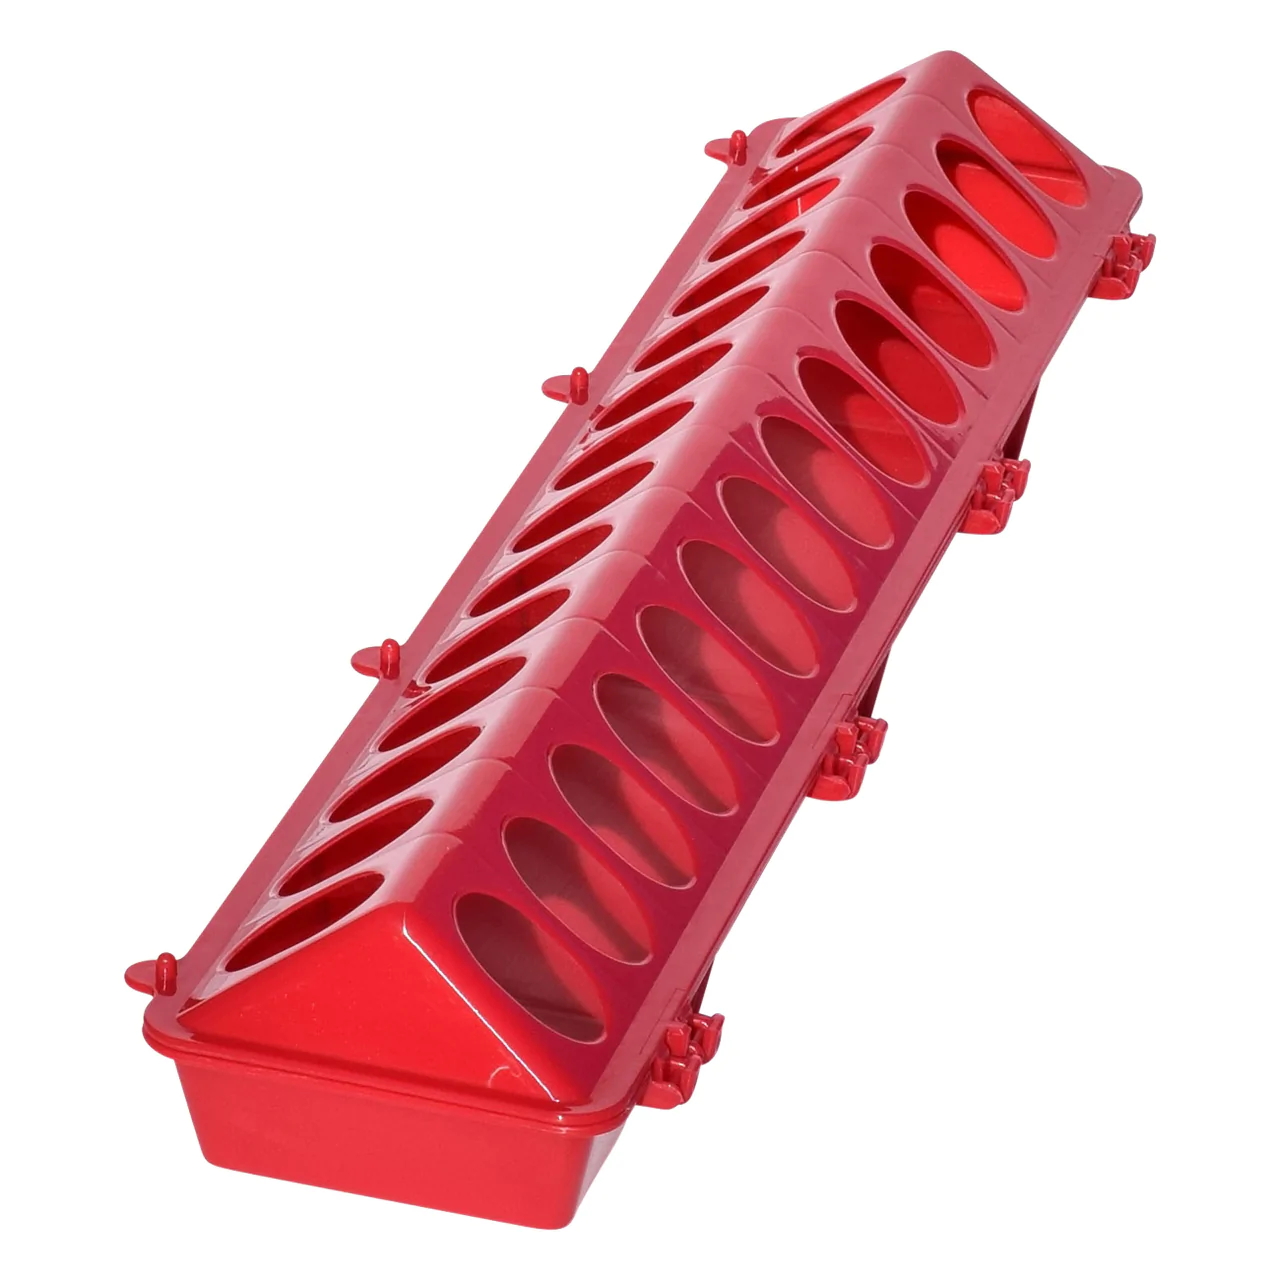 TuffStuff Poultry Ground Feeder - 12" - Red